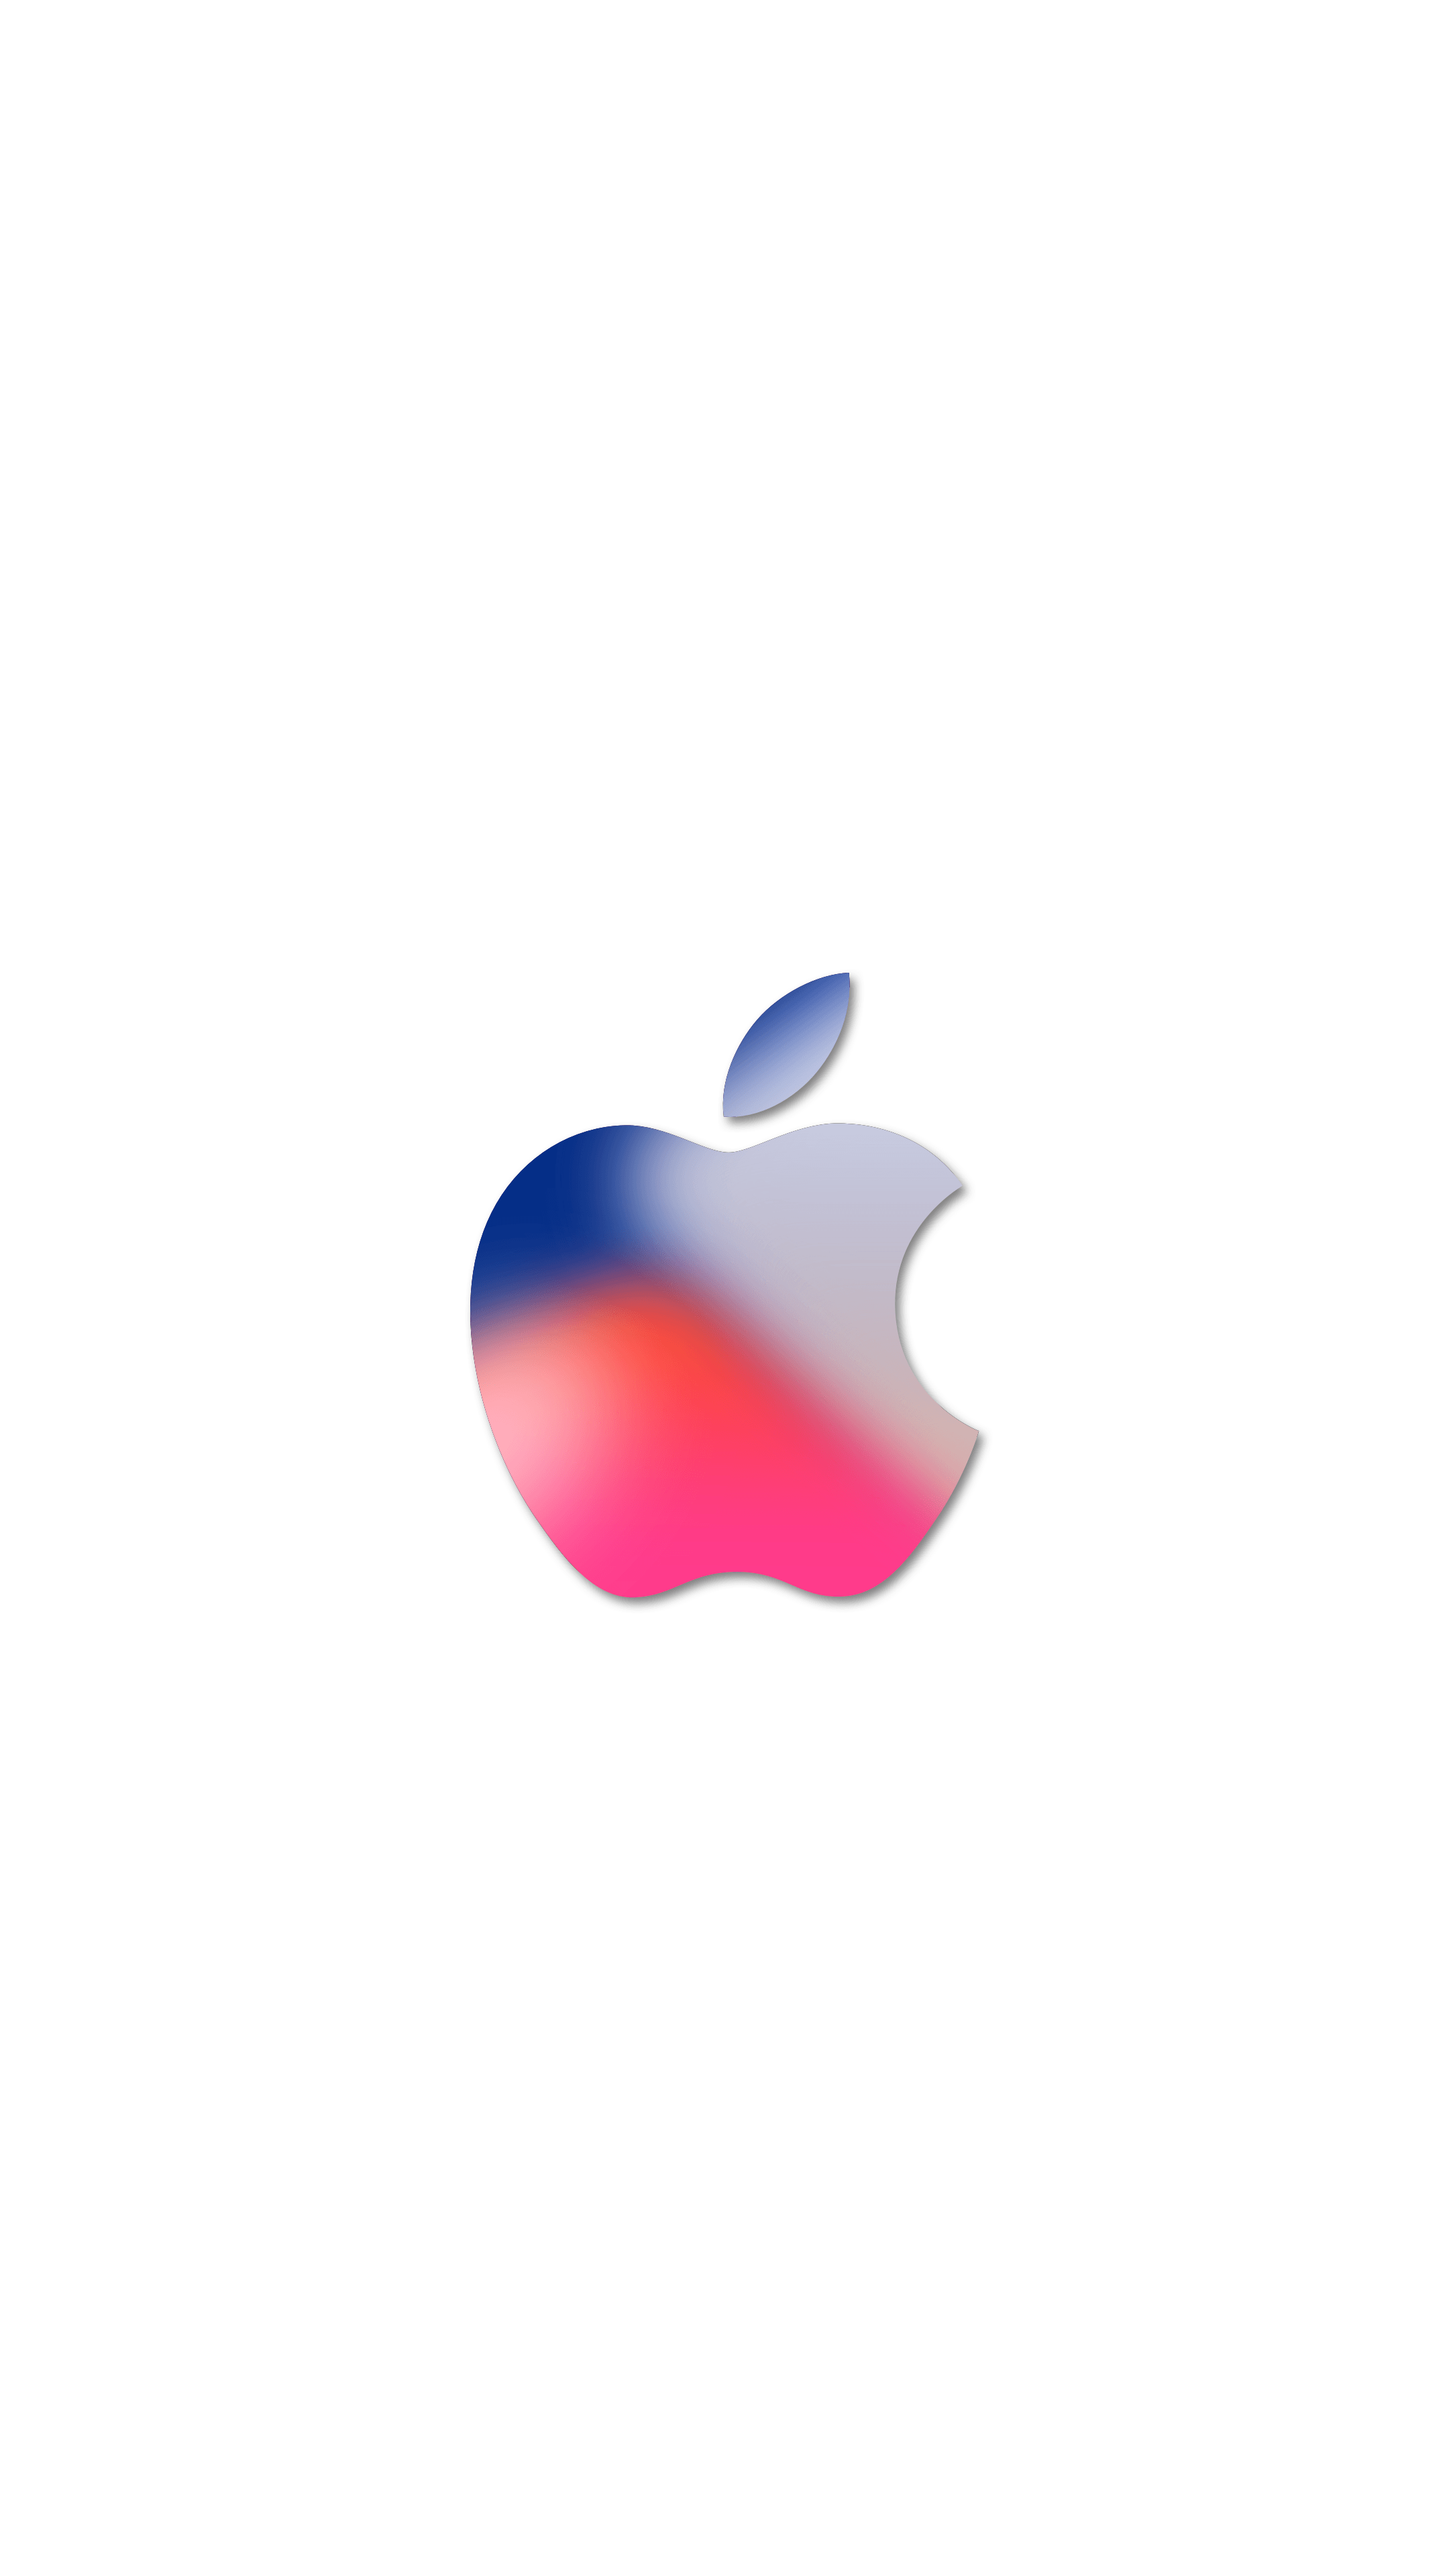 Colored Apple Logo - Download September 12 iPhone 8 Event Wallpaper For iPhone, iPad